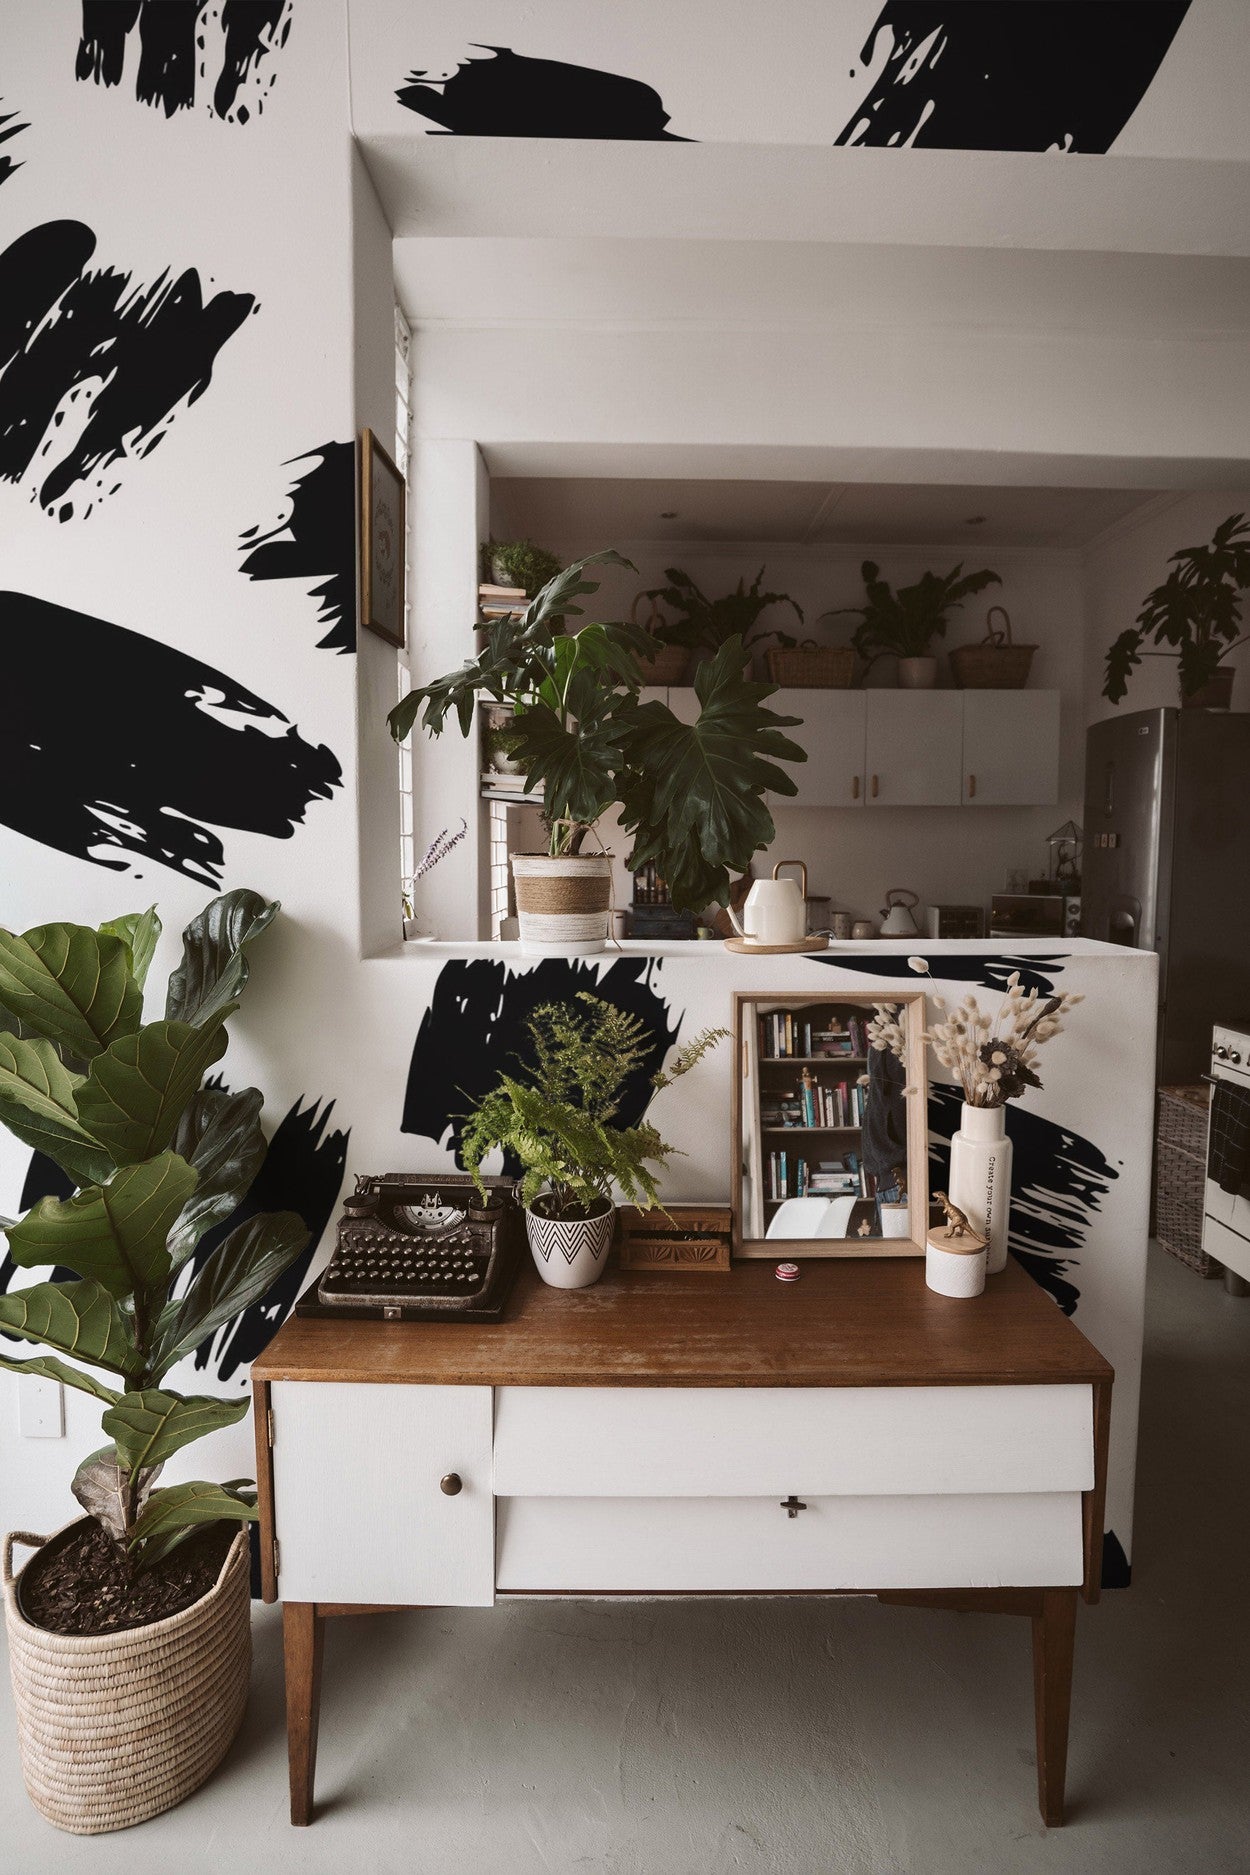 Cozy interior design with a desk, plants, and an abstract black and white wall mural